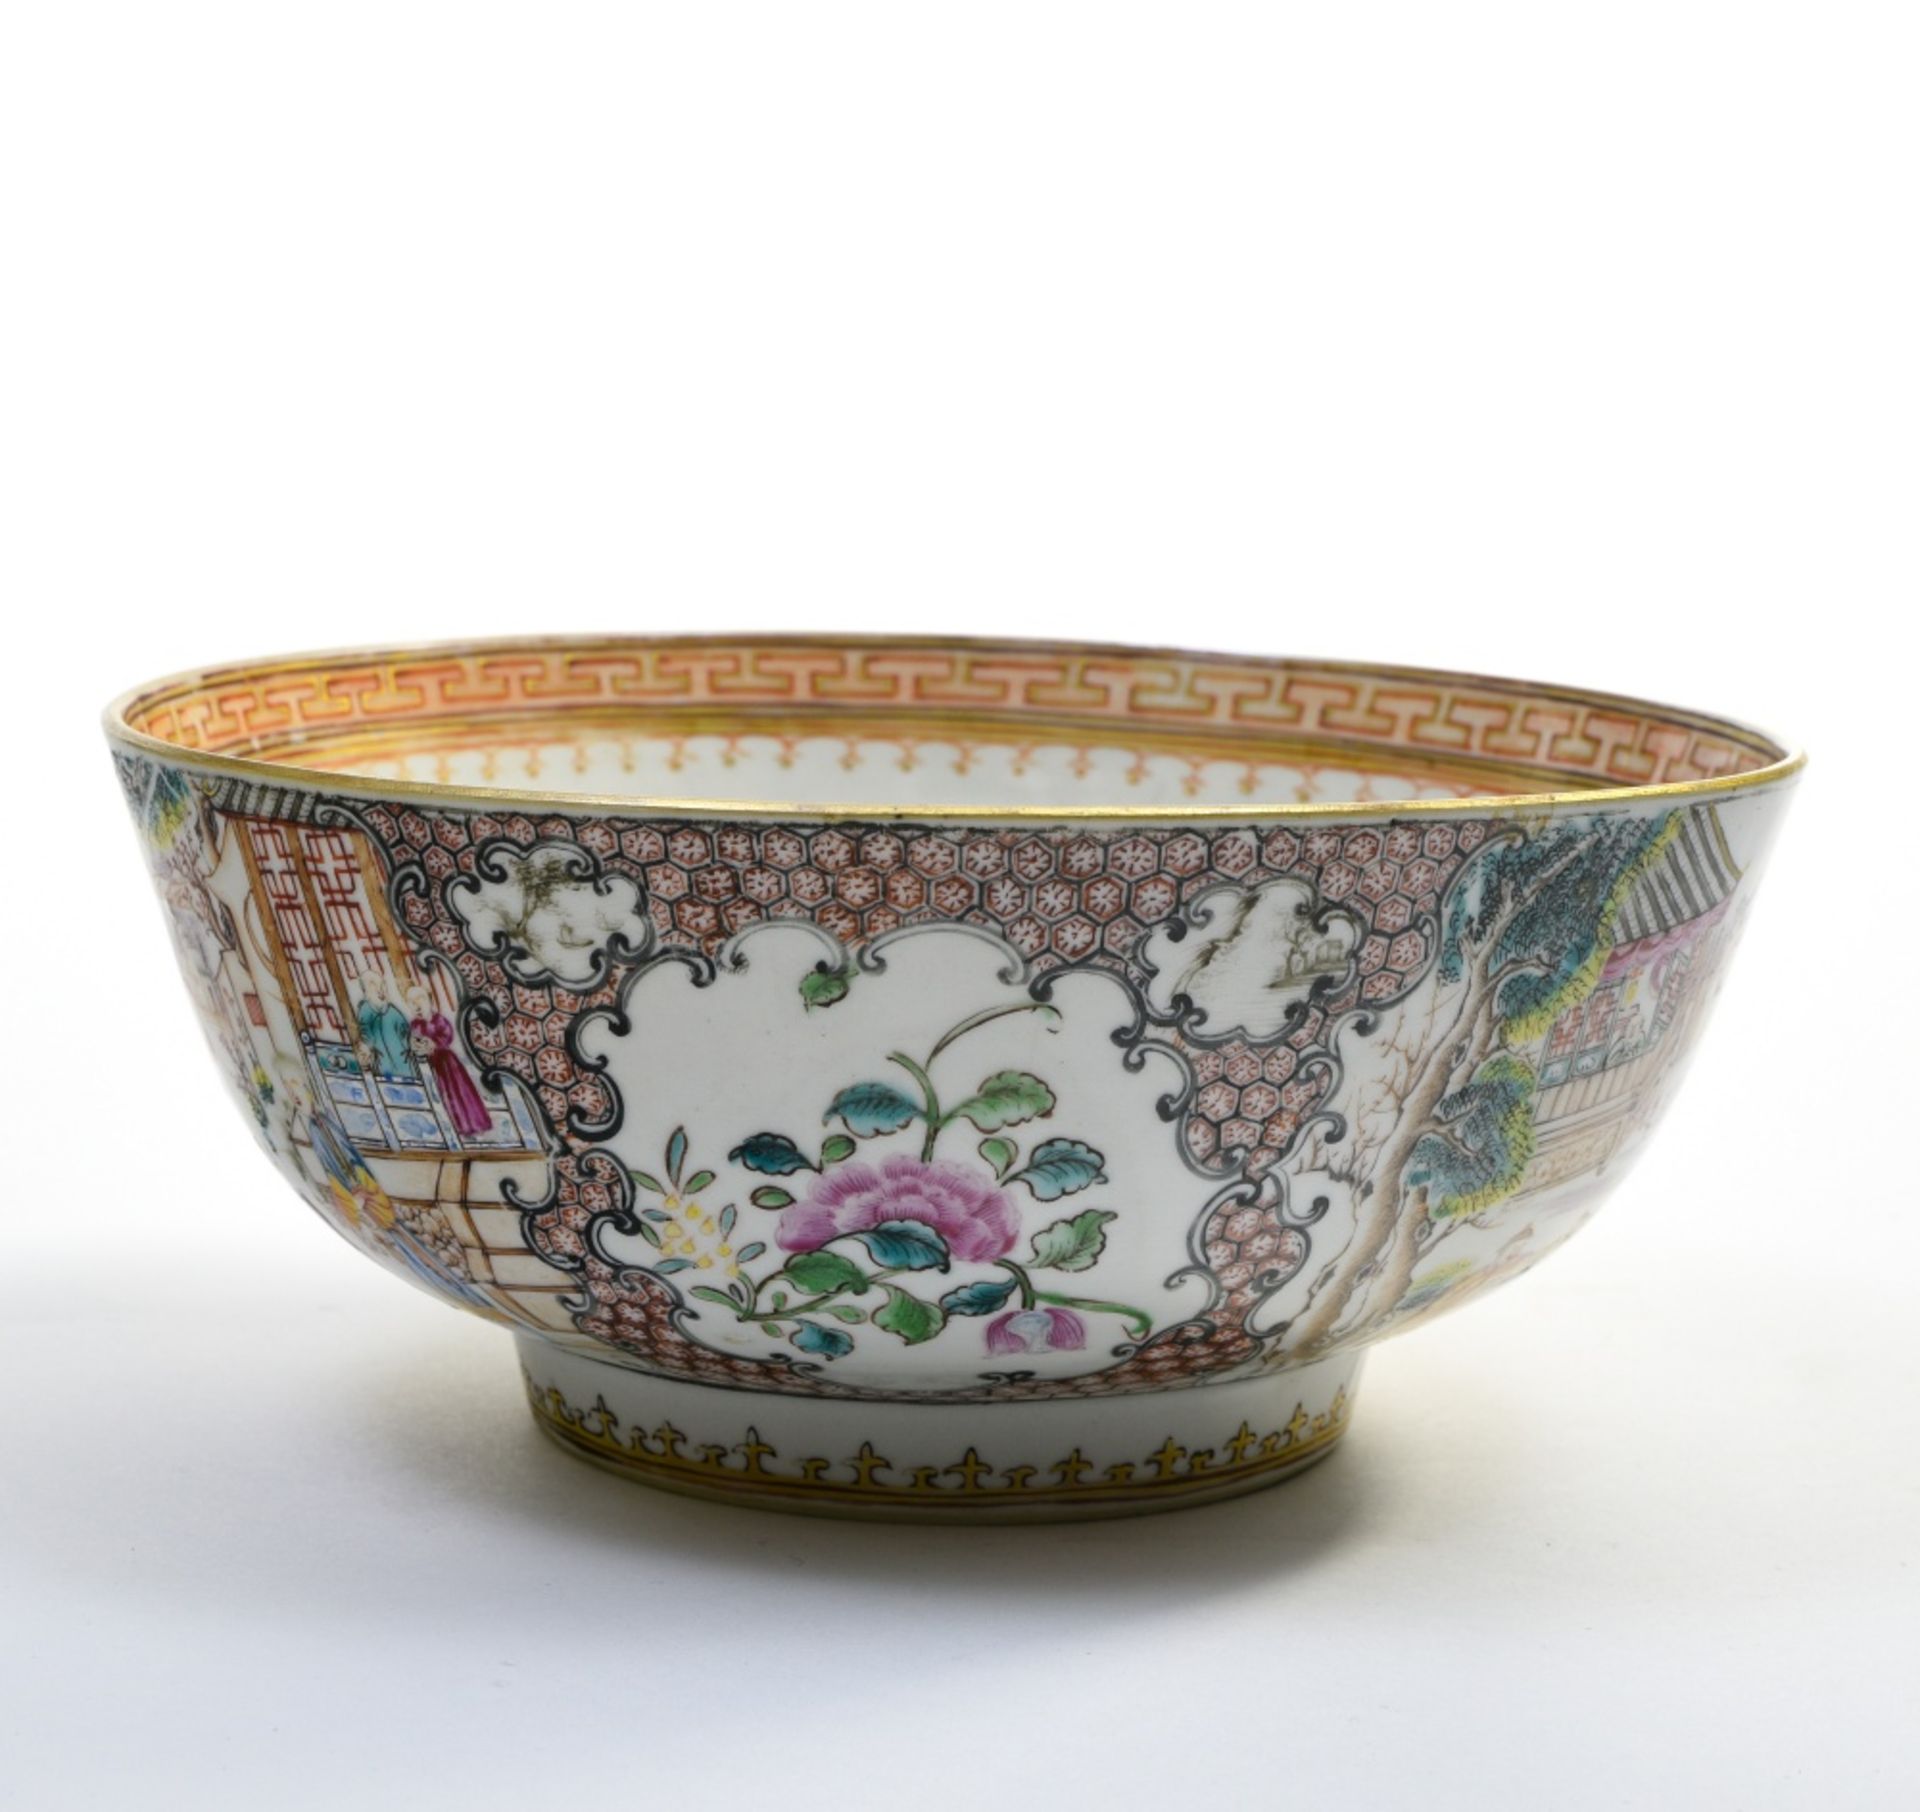 China, 18th century Large flared bowl, Porcelain, with Famille Rose enamelled dŽcor of a banquet, - Image 3 of 7